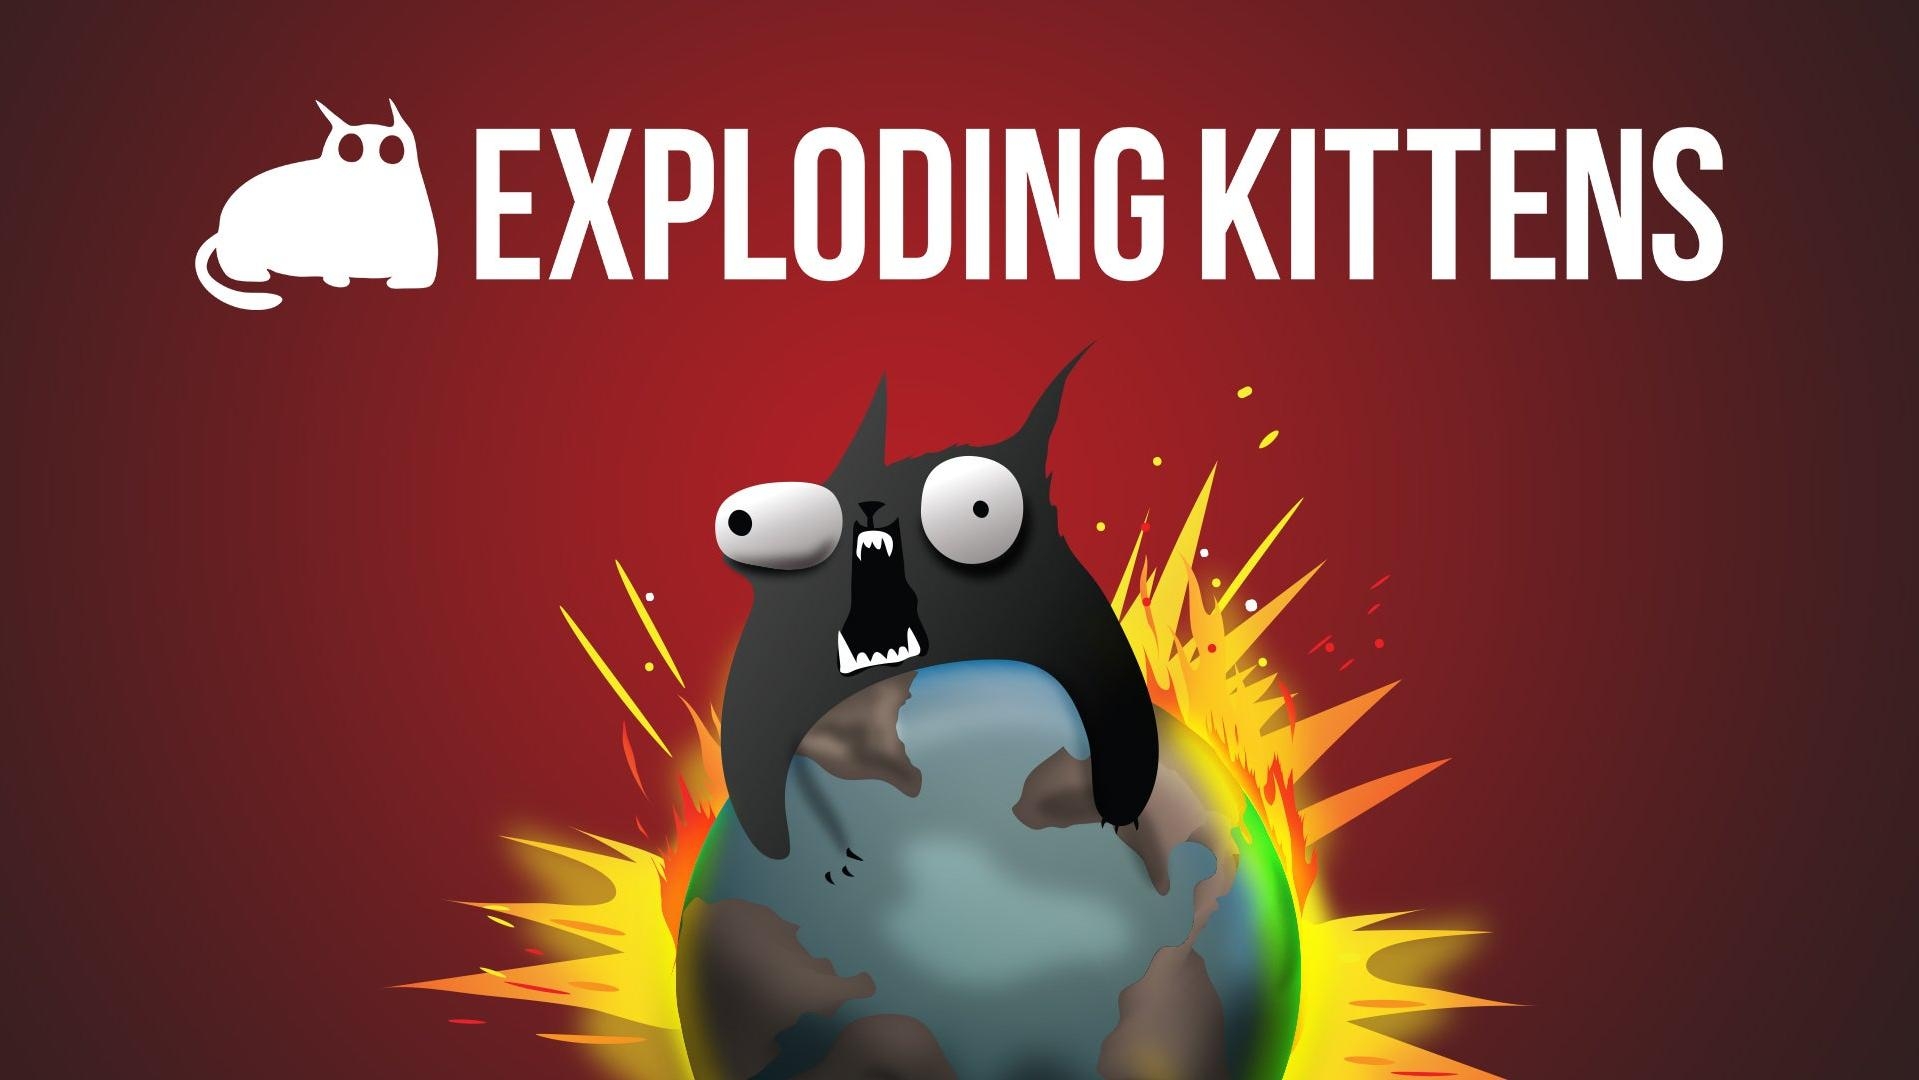 How the hell are Mike Judge and Greg Daniels going to turn Exploding Kittens into a Netflix show?